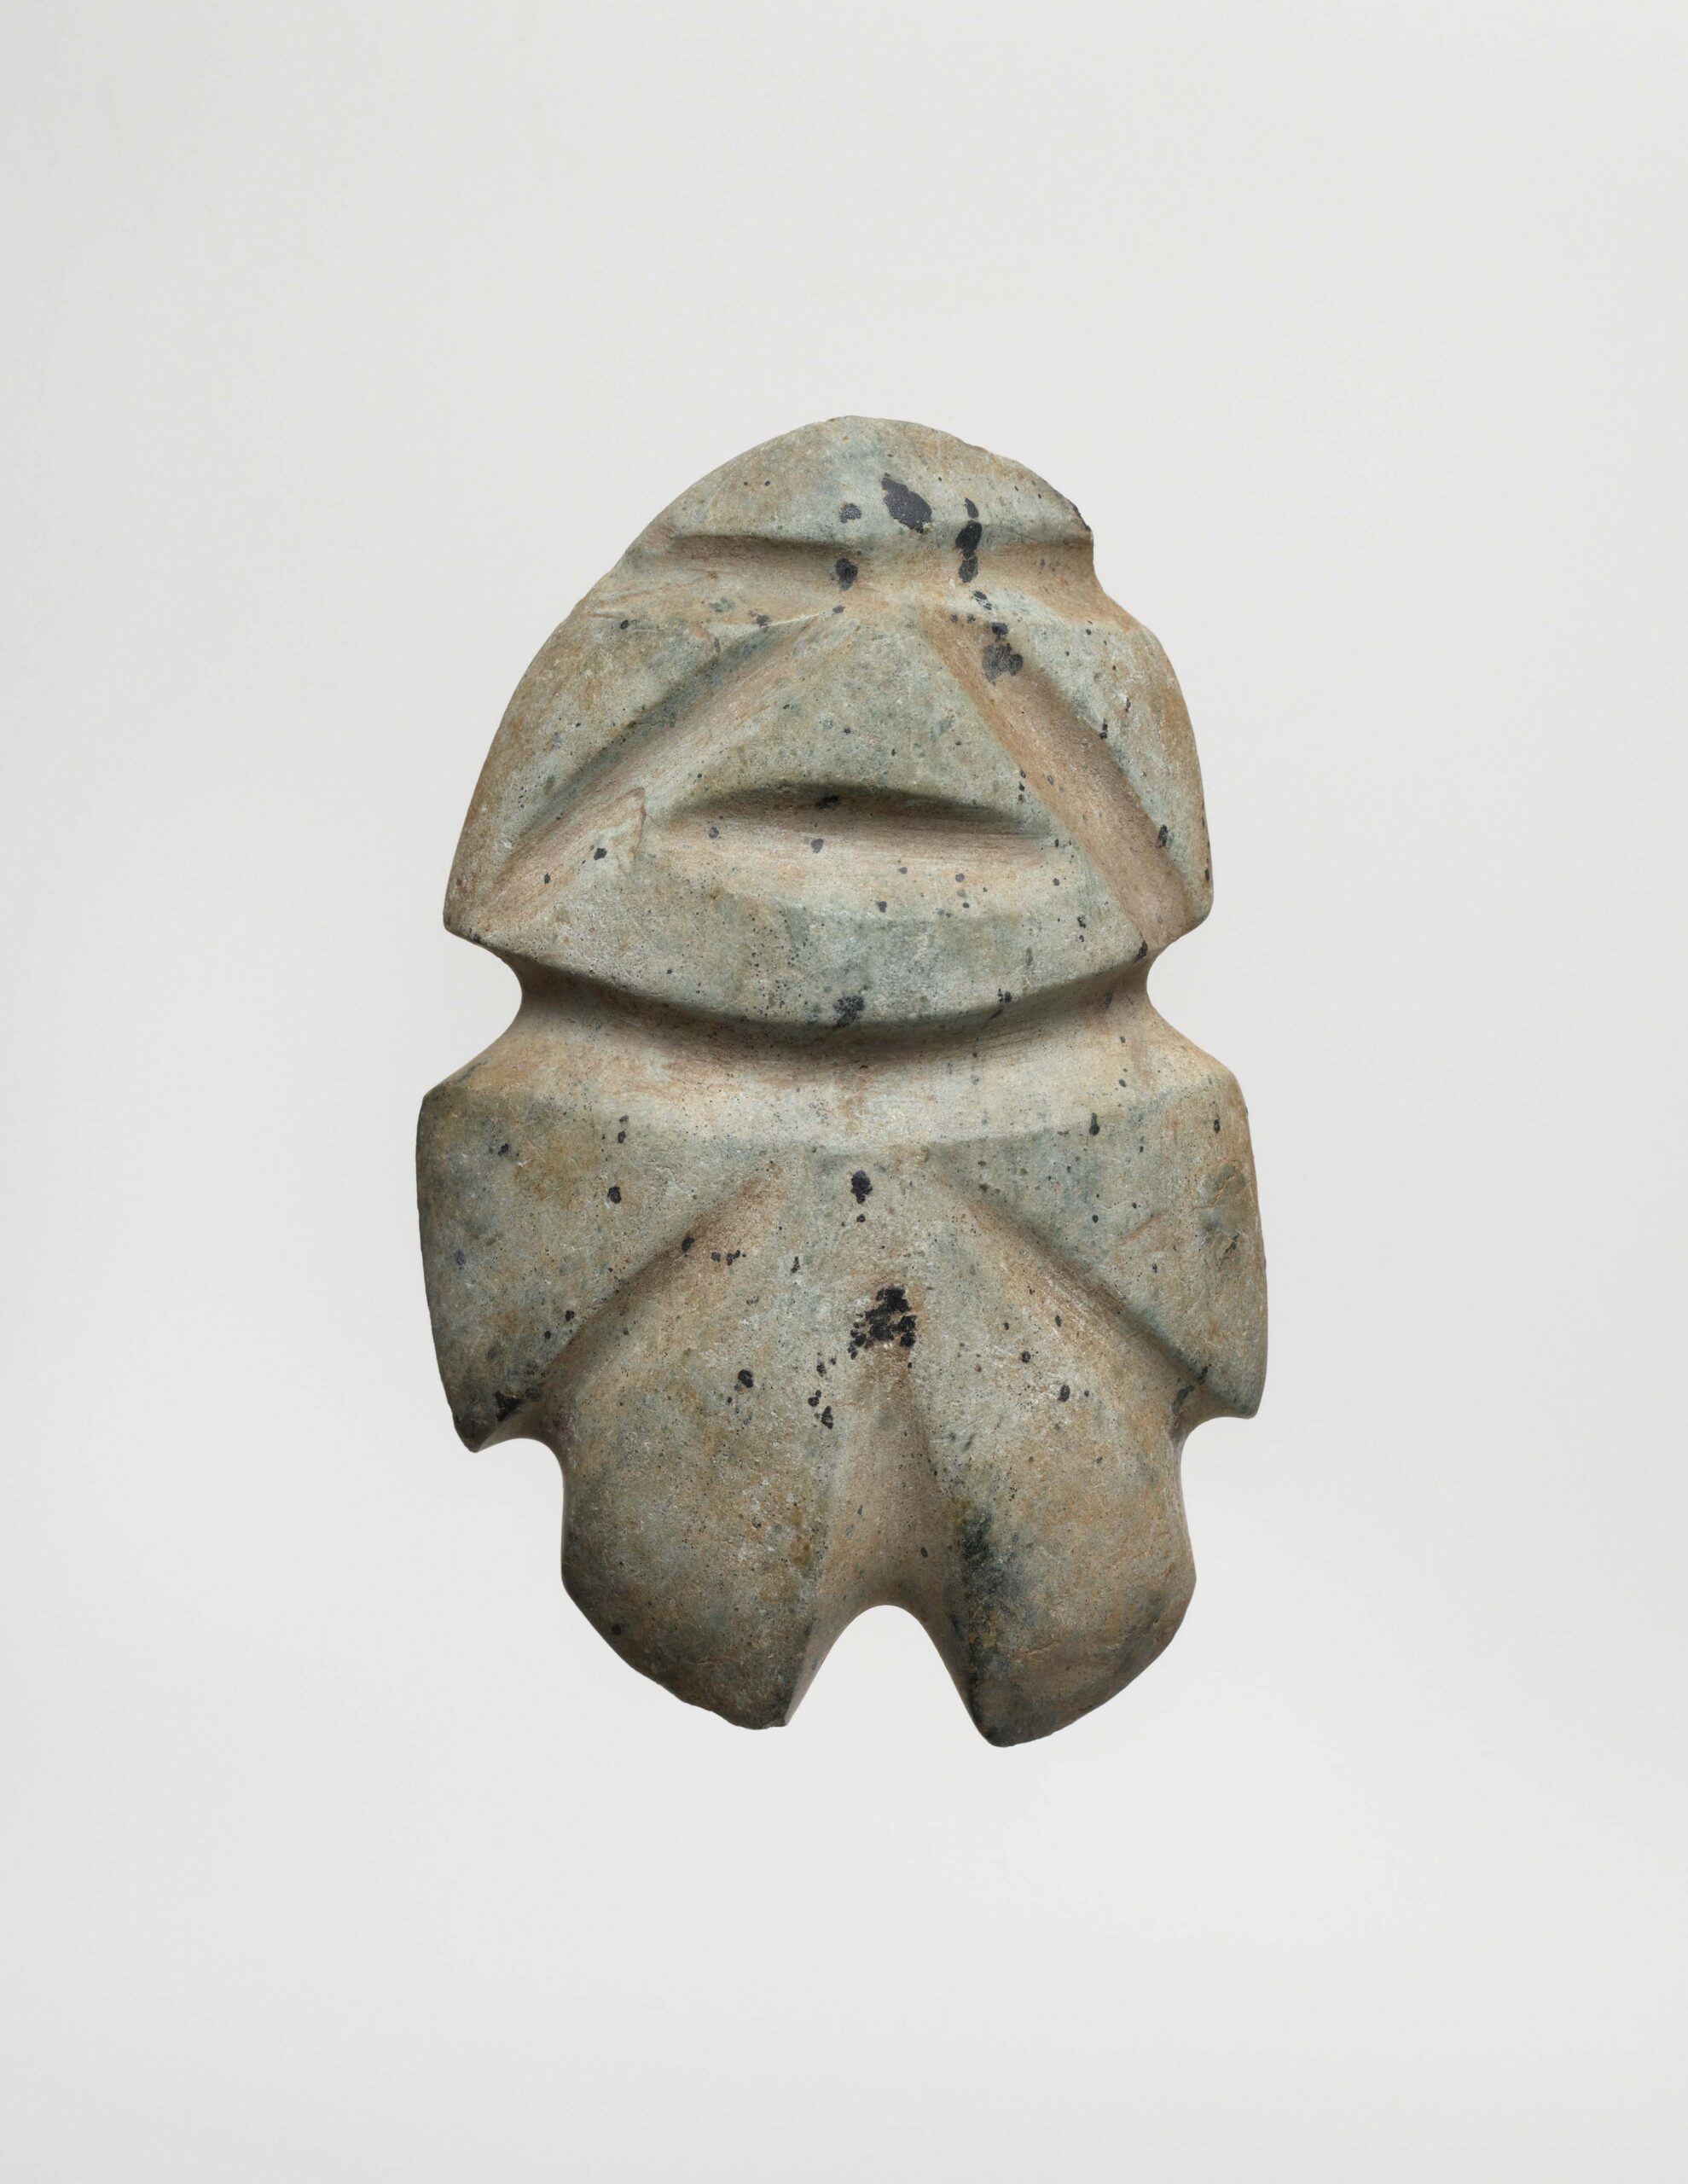 Small abstract standing figure with indented features.